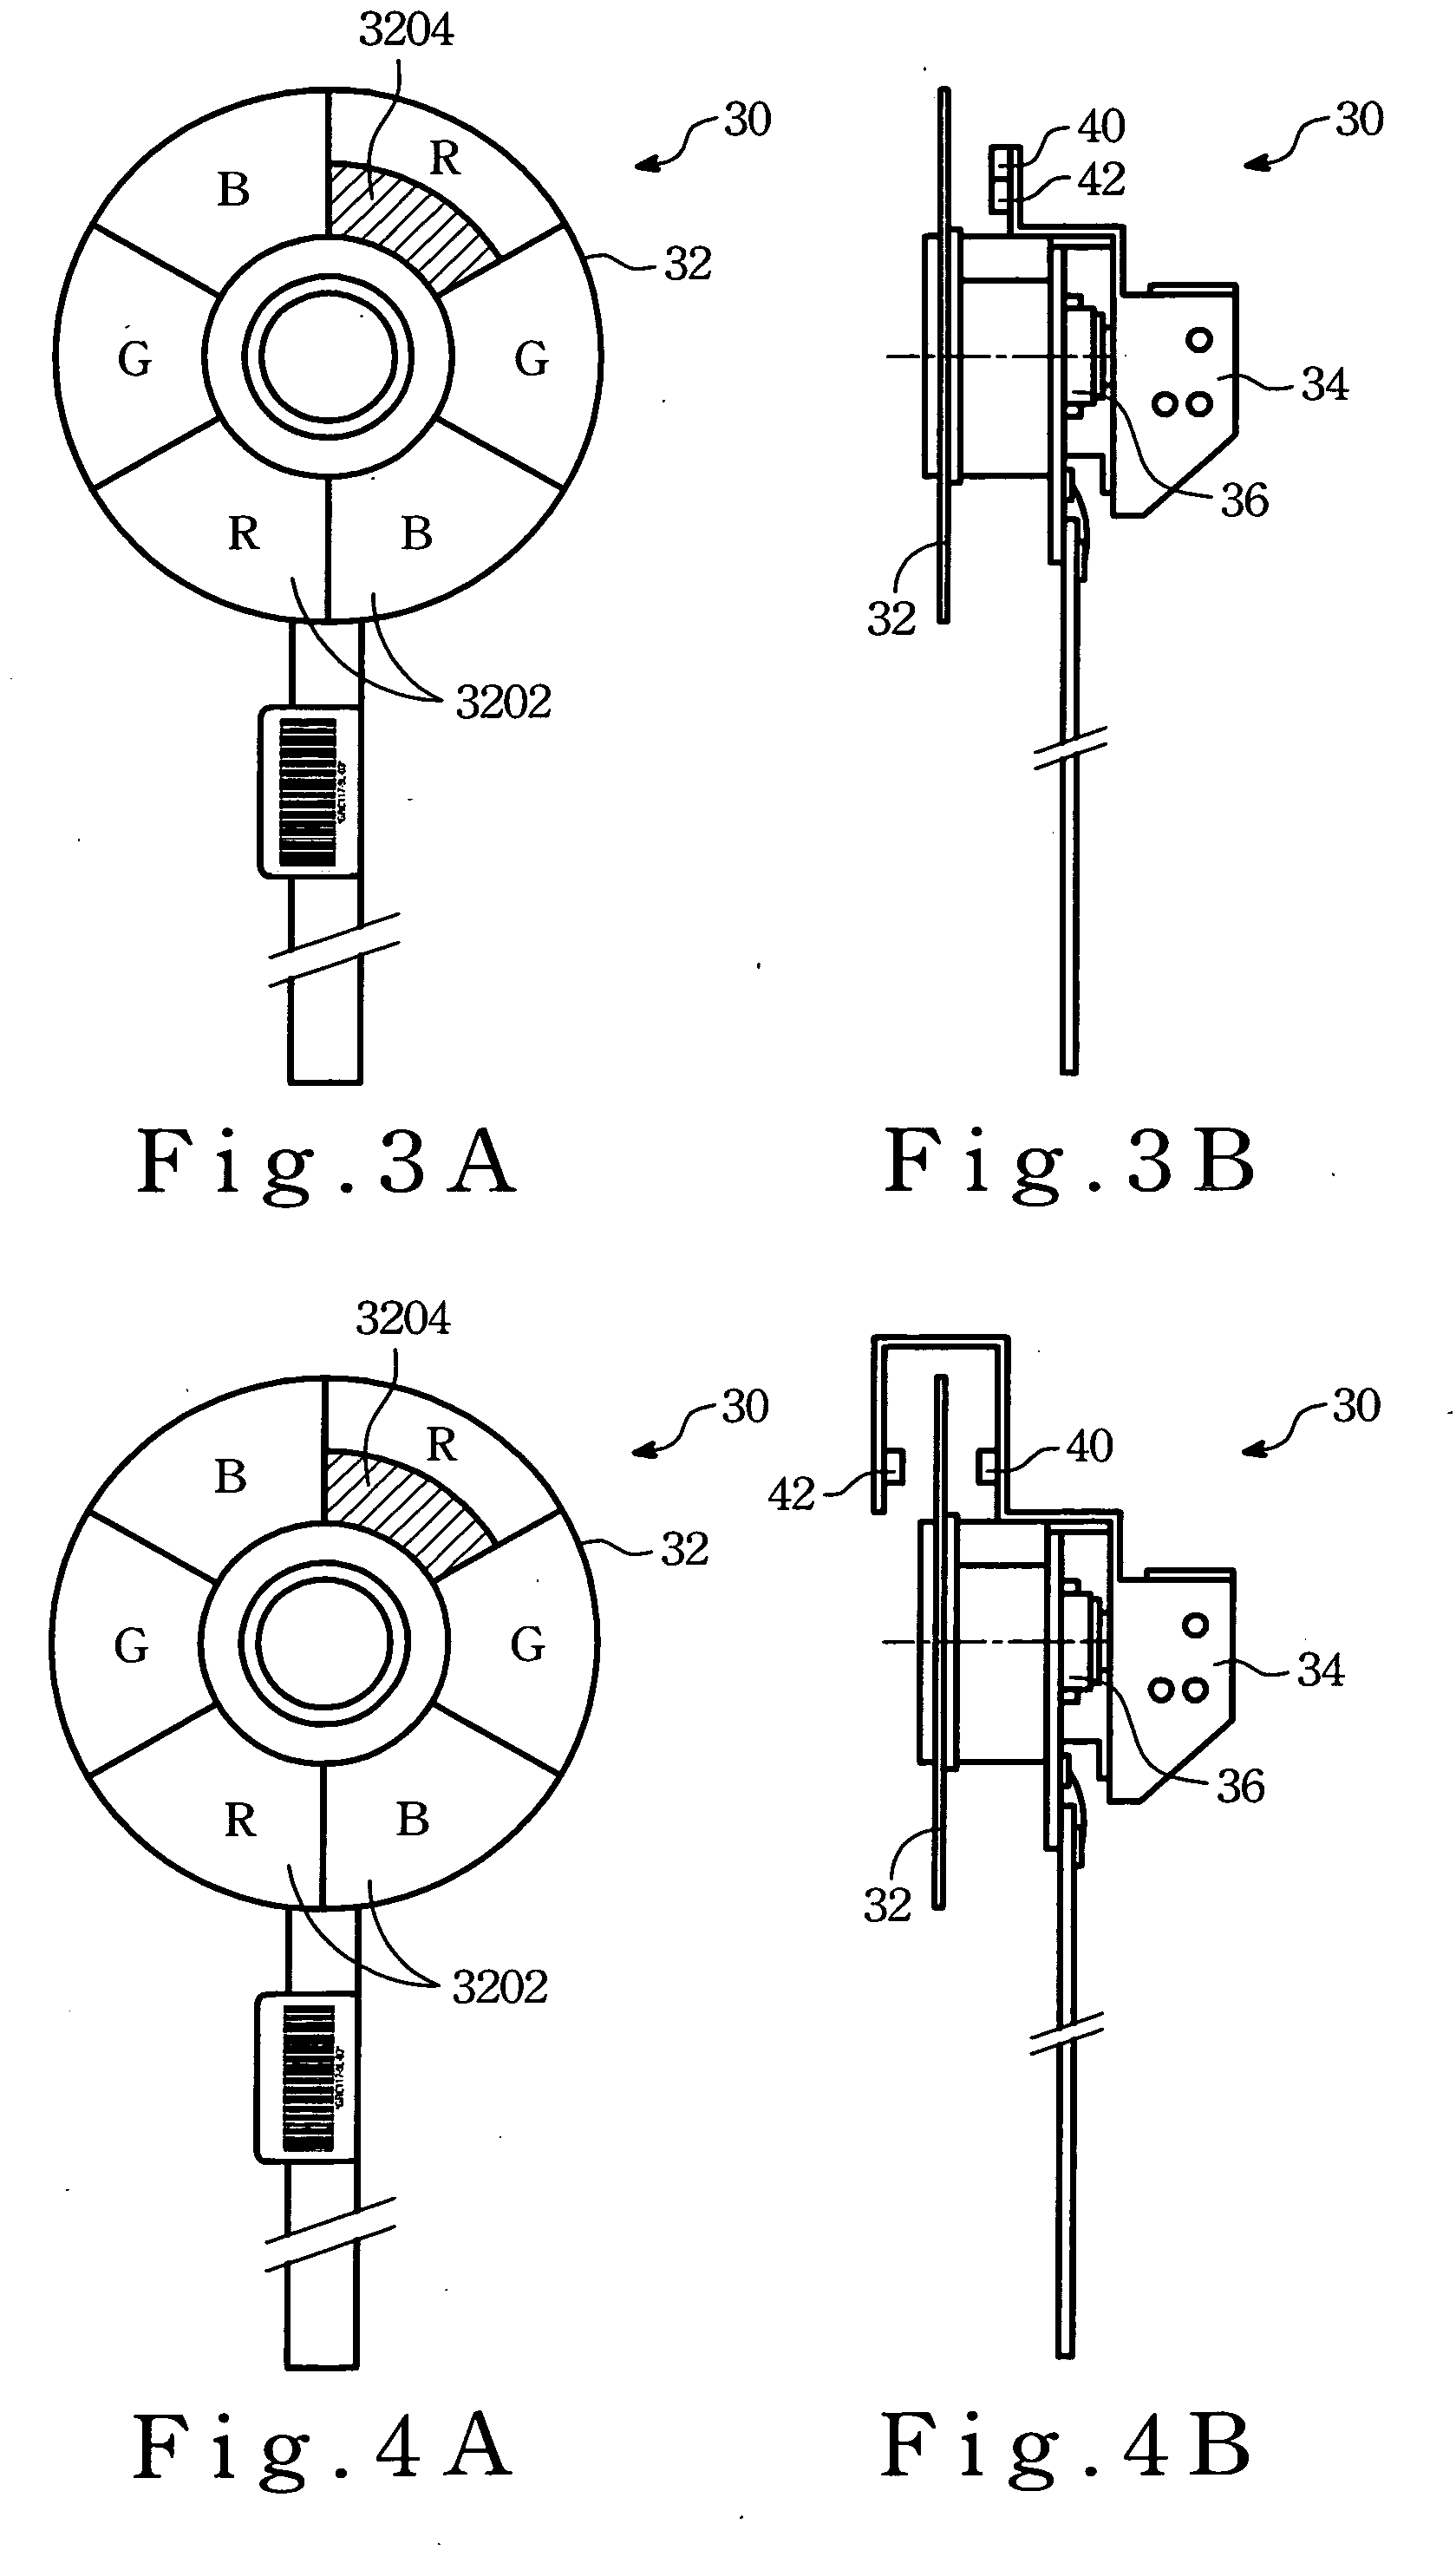 Color wheel module for a projection apparatus